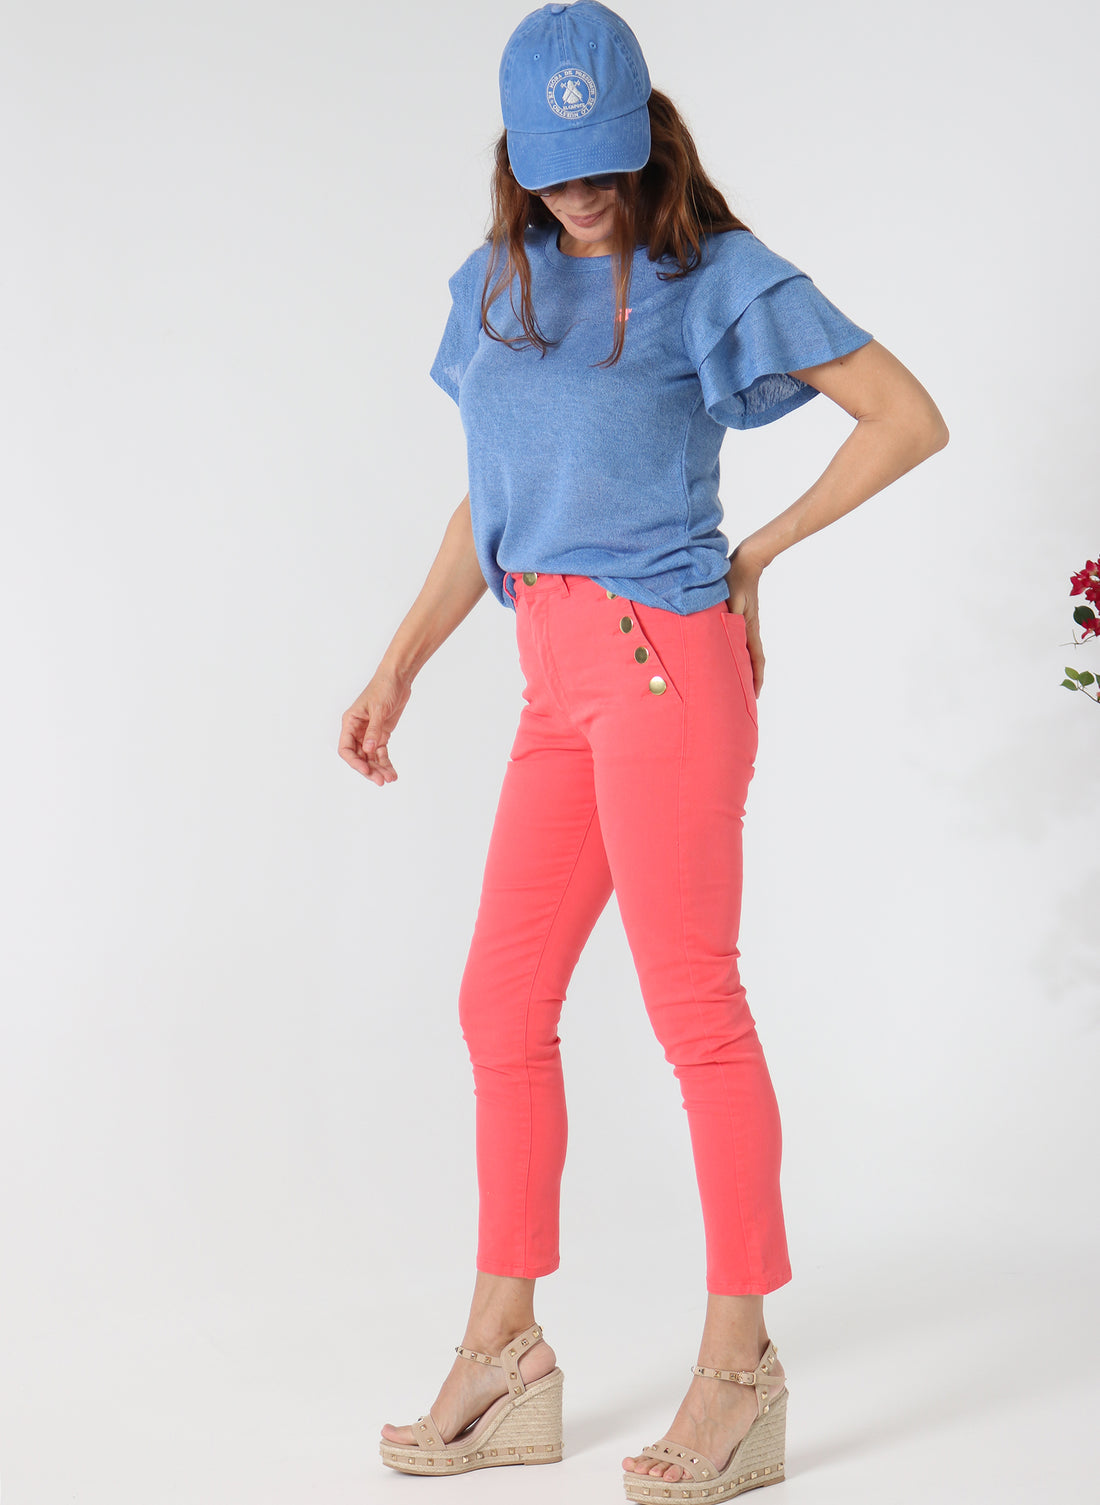 Coral Twill Pants Buttons Woman